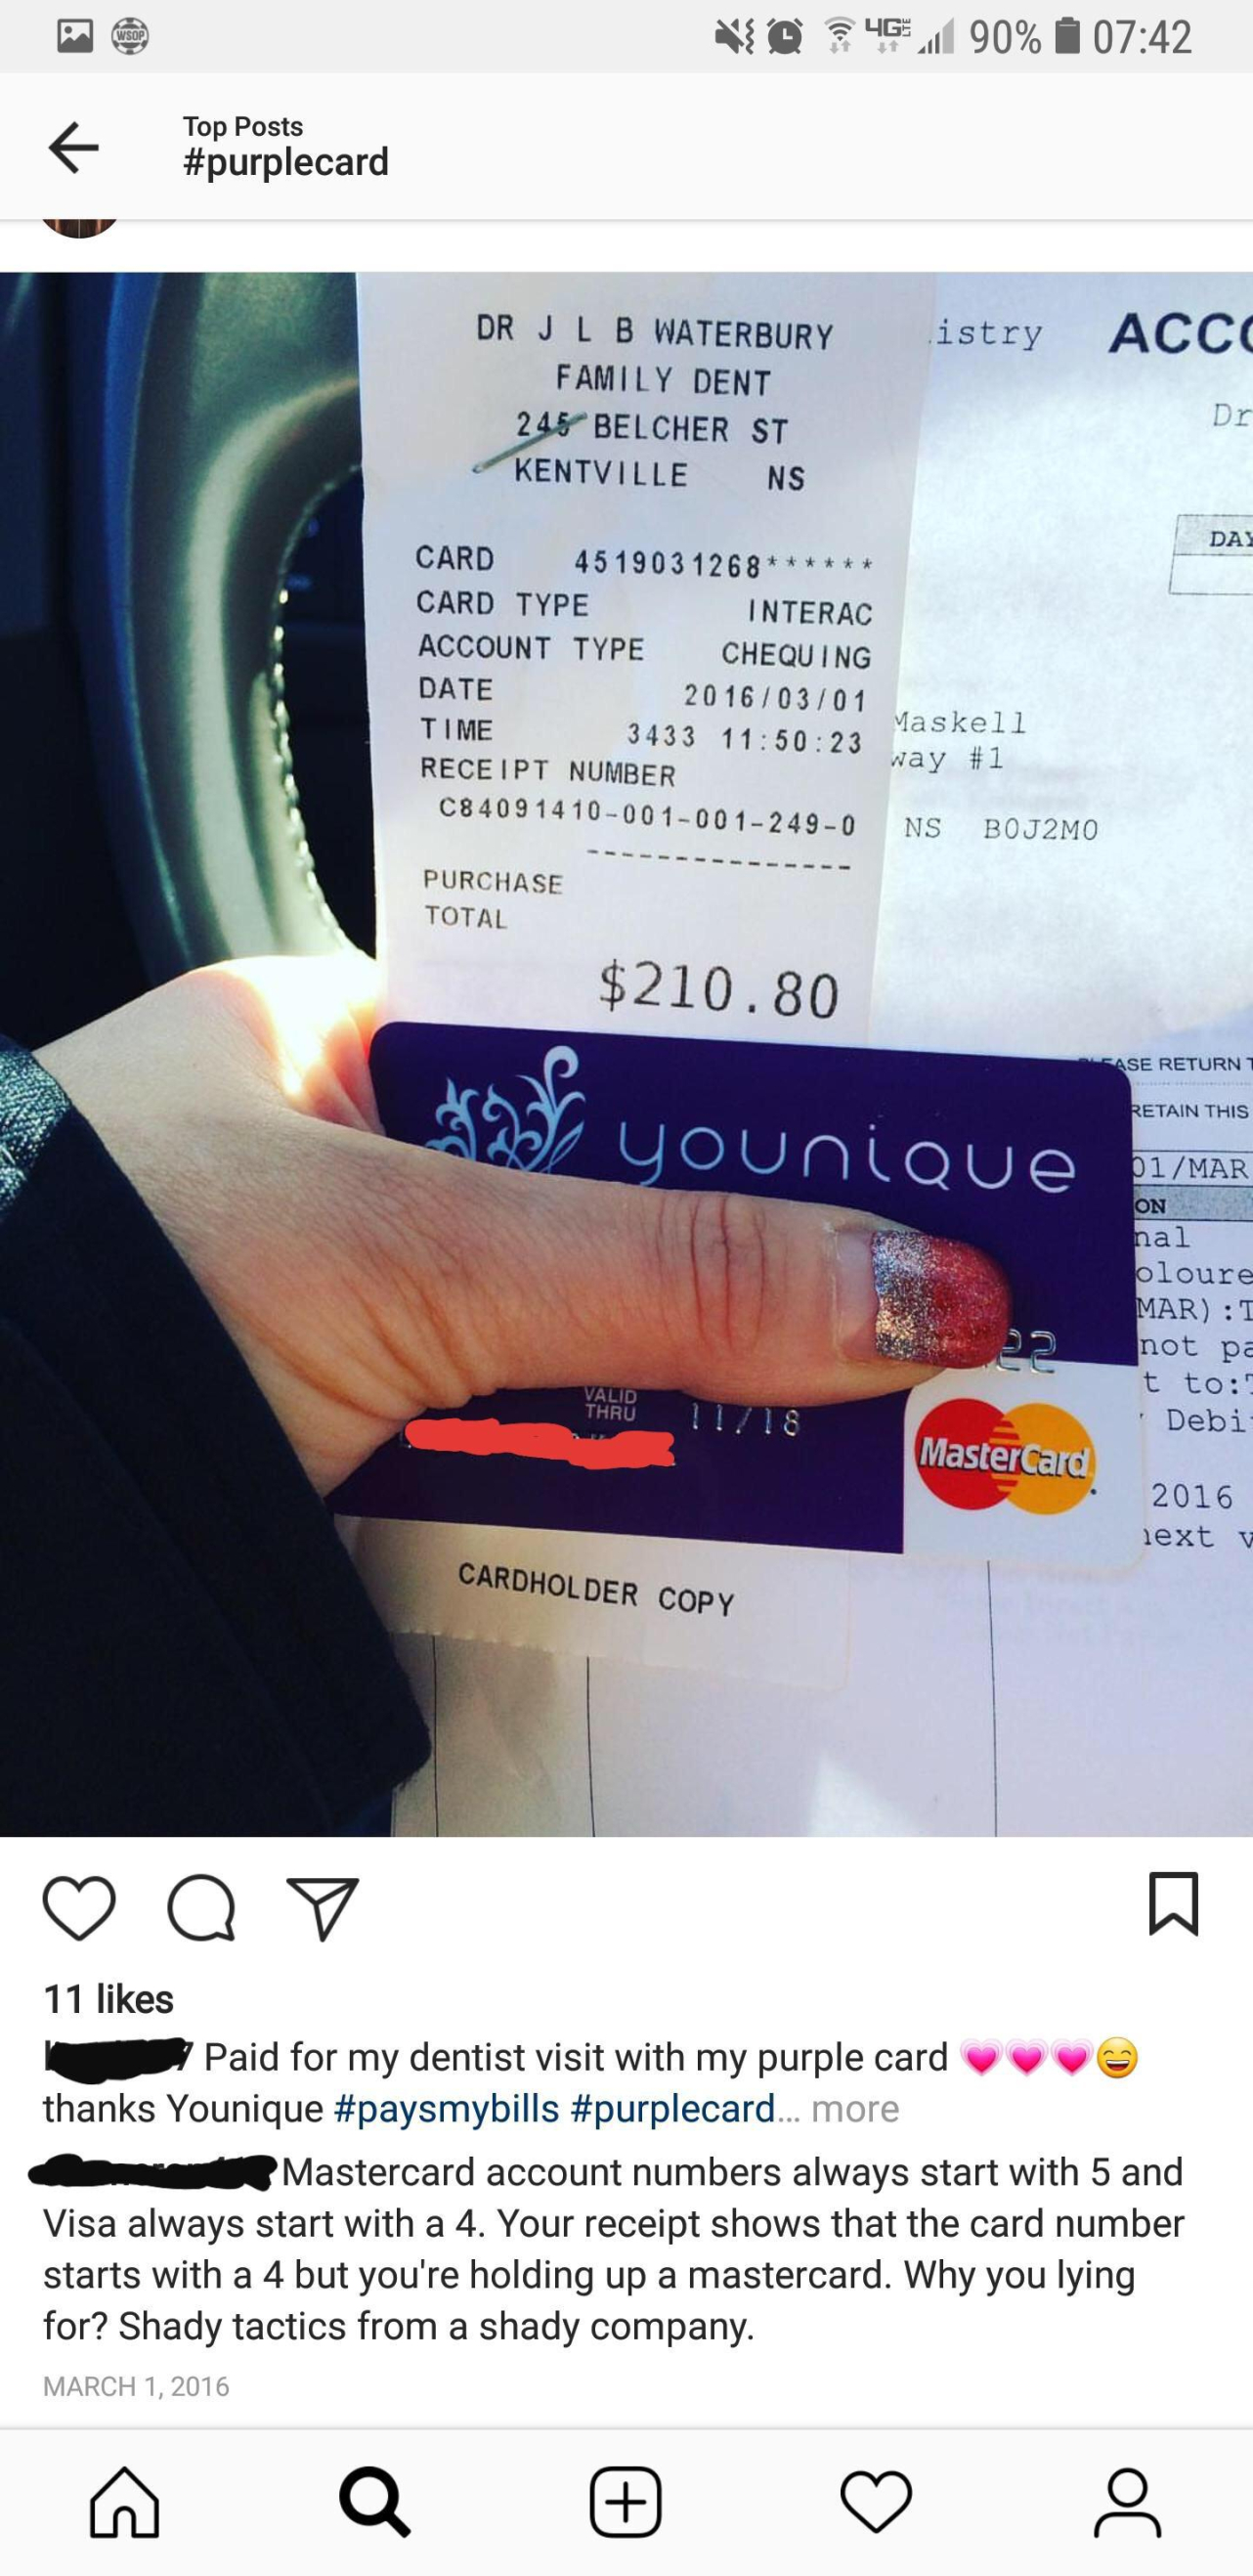 younique card meme - 90% Latty Acco Dr Lb Waterbury Family Bent 341 Belcher St Kentville Ns Mccount Type Chequin 10 $210.80 younique Chronolder Cop Oy 11 Paid for my dentist visit with my purple card Thanks Younique payamybills wpurplecard mom Mastercard